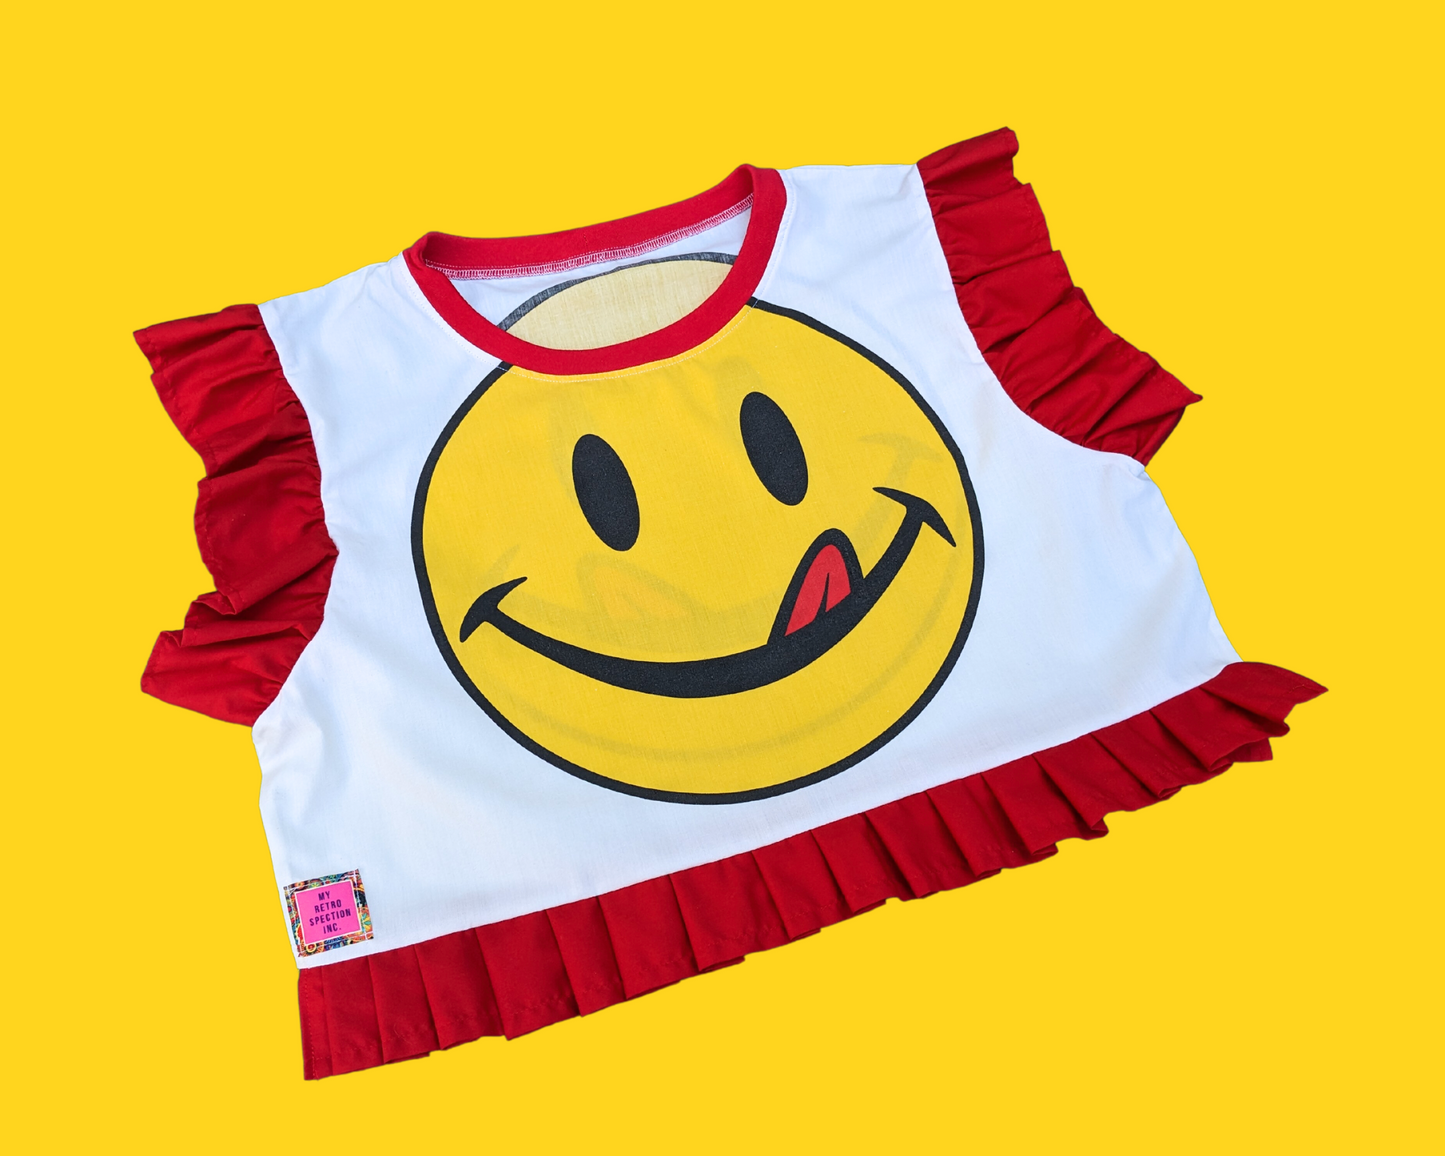 Handmade, Upcycled Vintage 1990's Smiley Face Crop Top Oversized XS - Fits Like A Size M